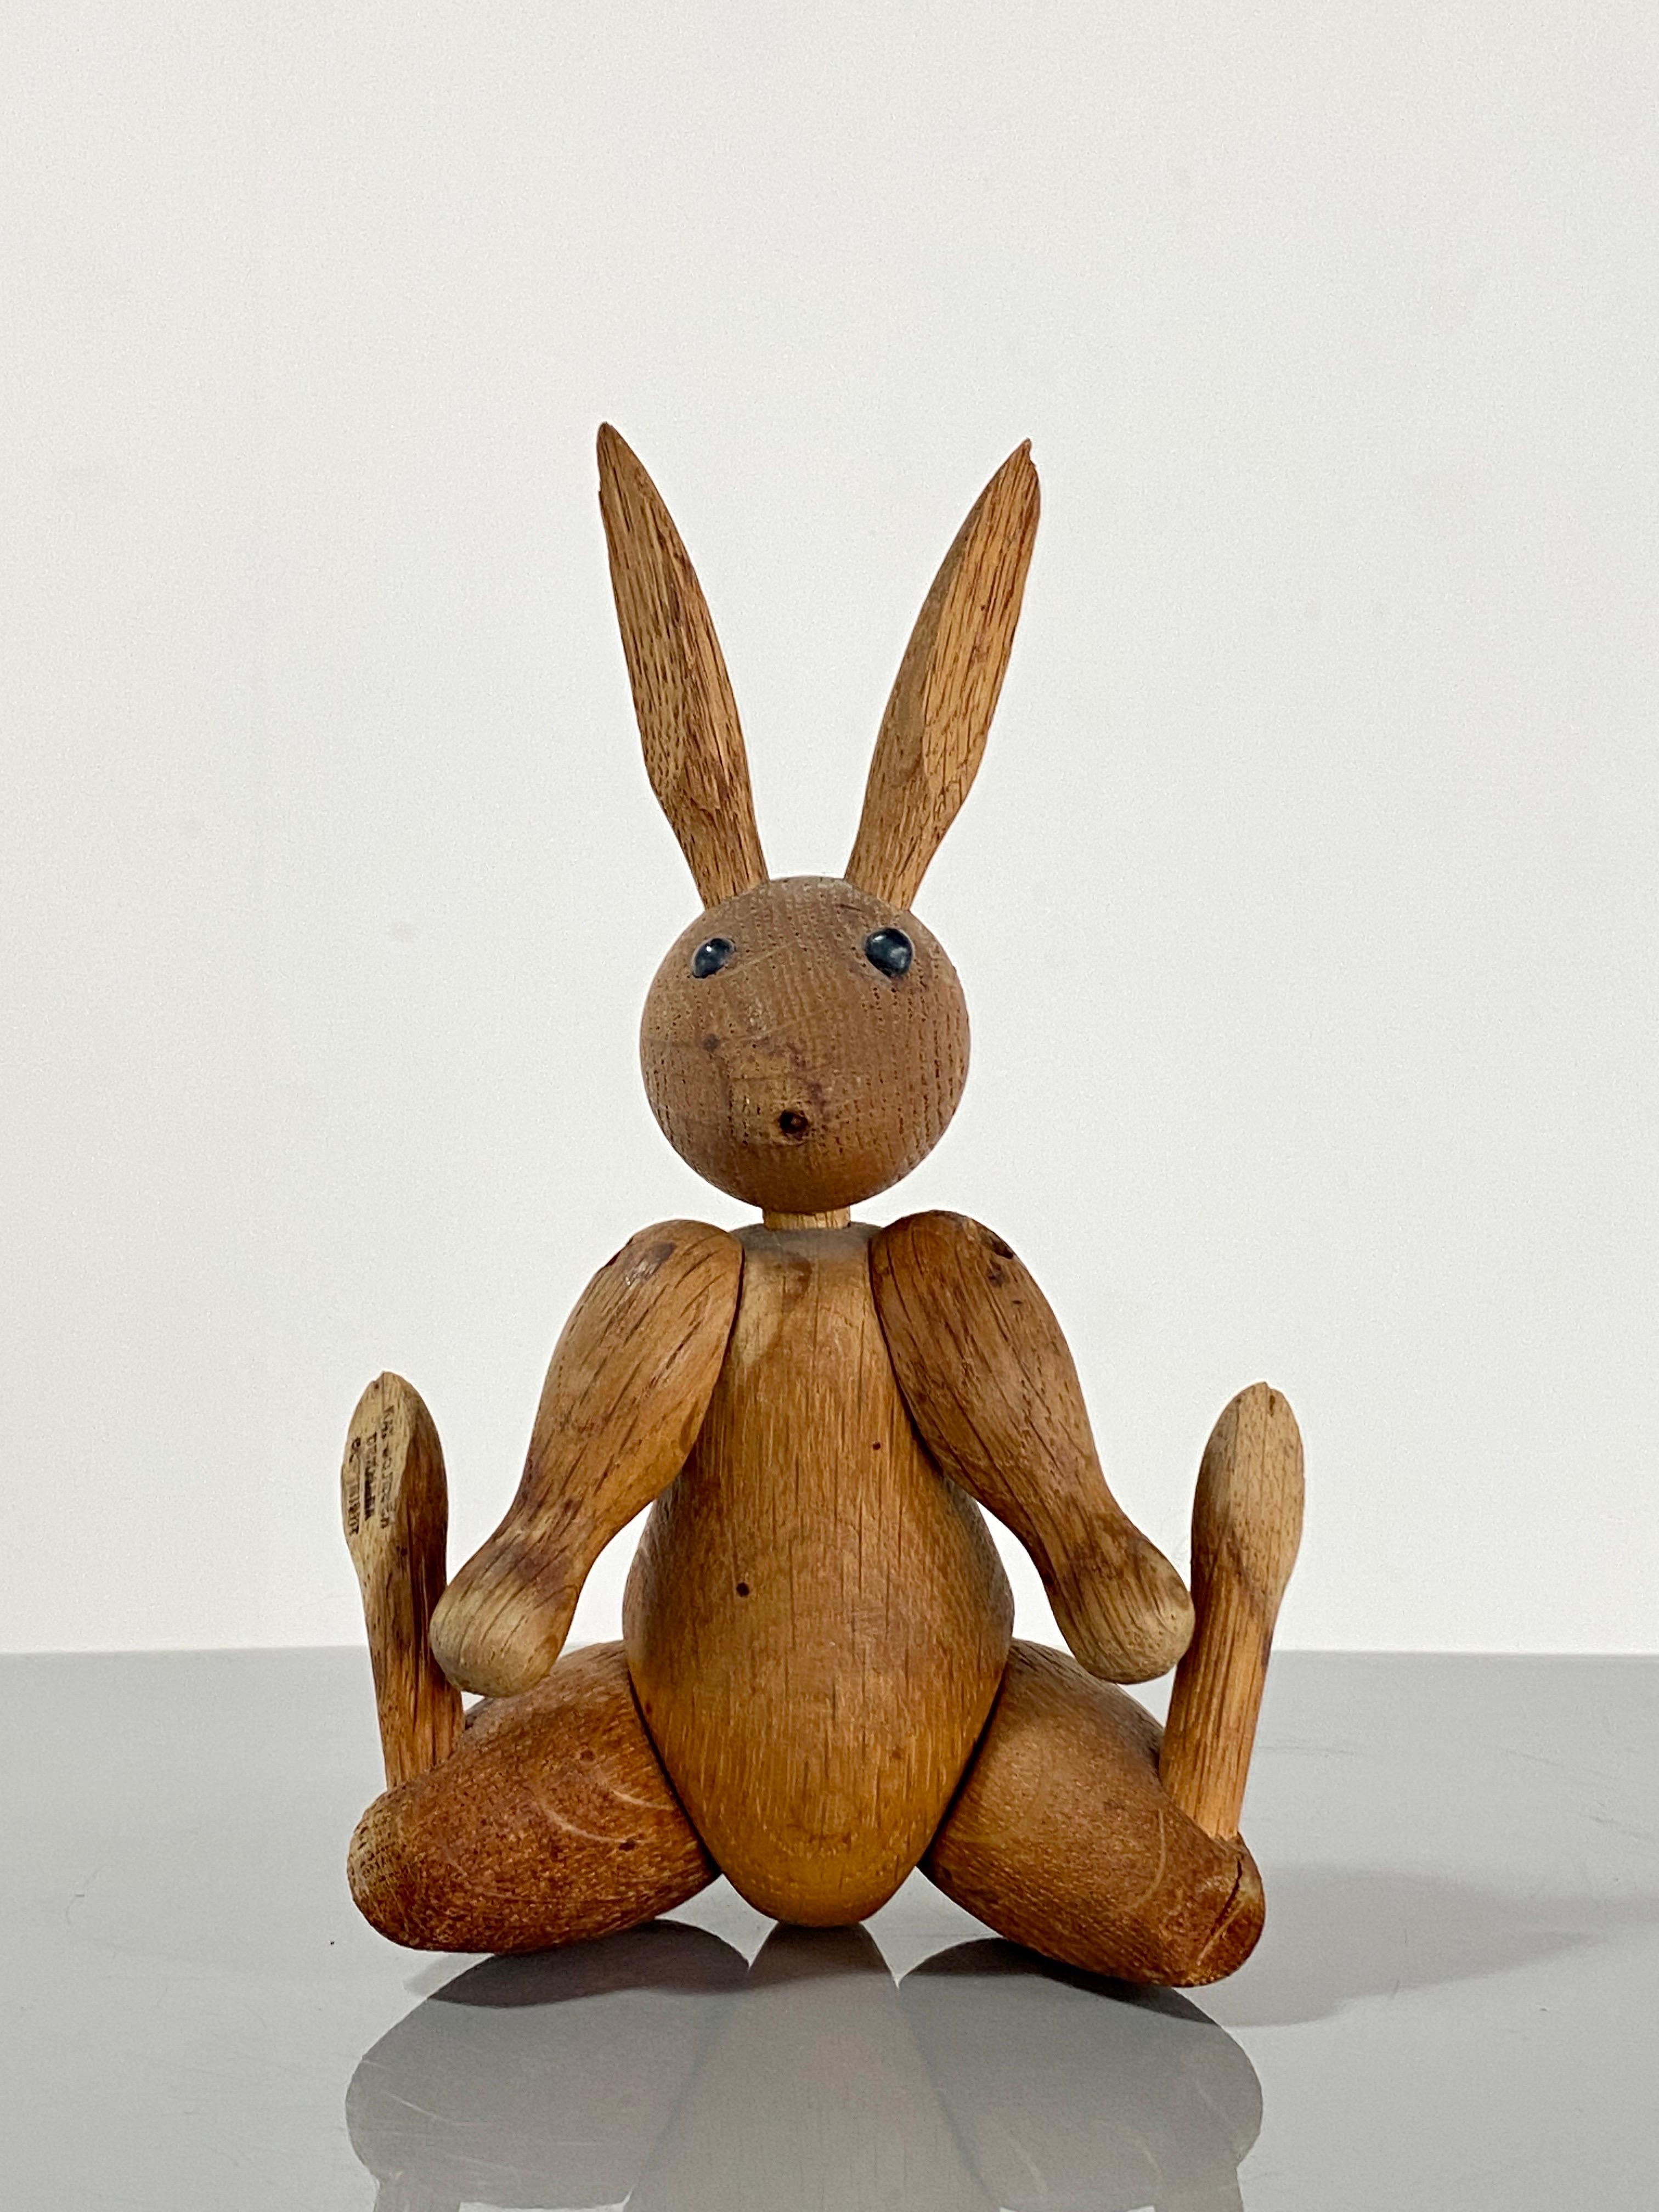 Vintage Rabbit Figurine by Kay Bojesen, It Was Designed in 1957, This is an Exam 1